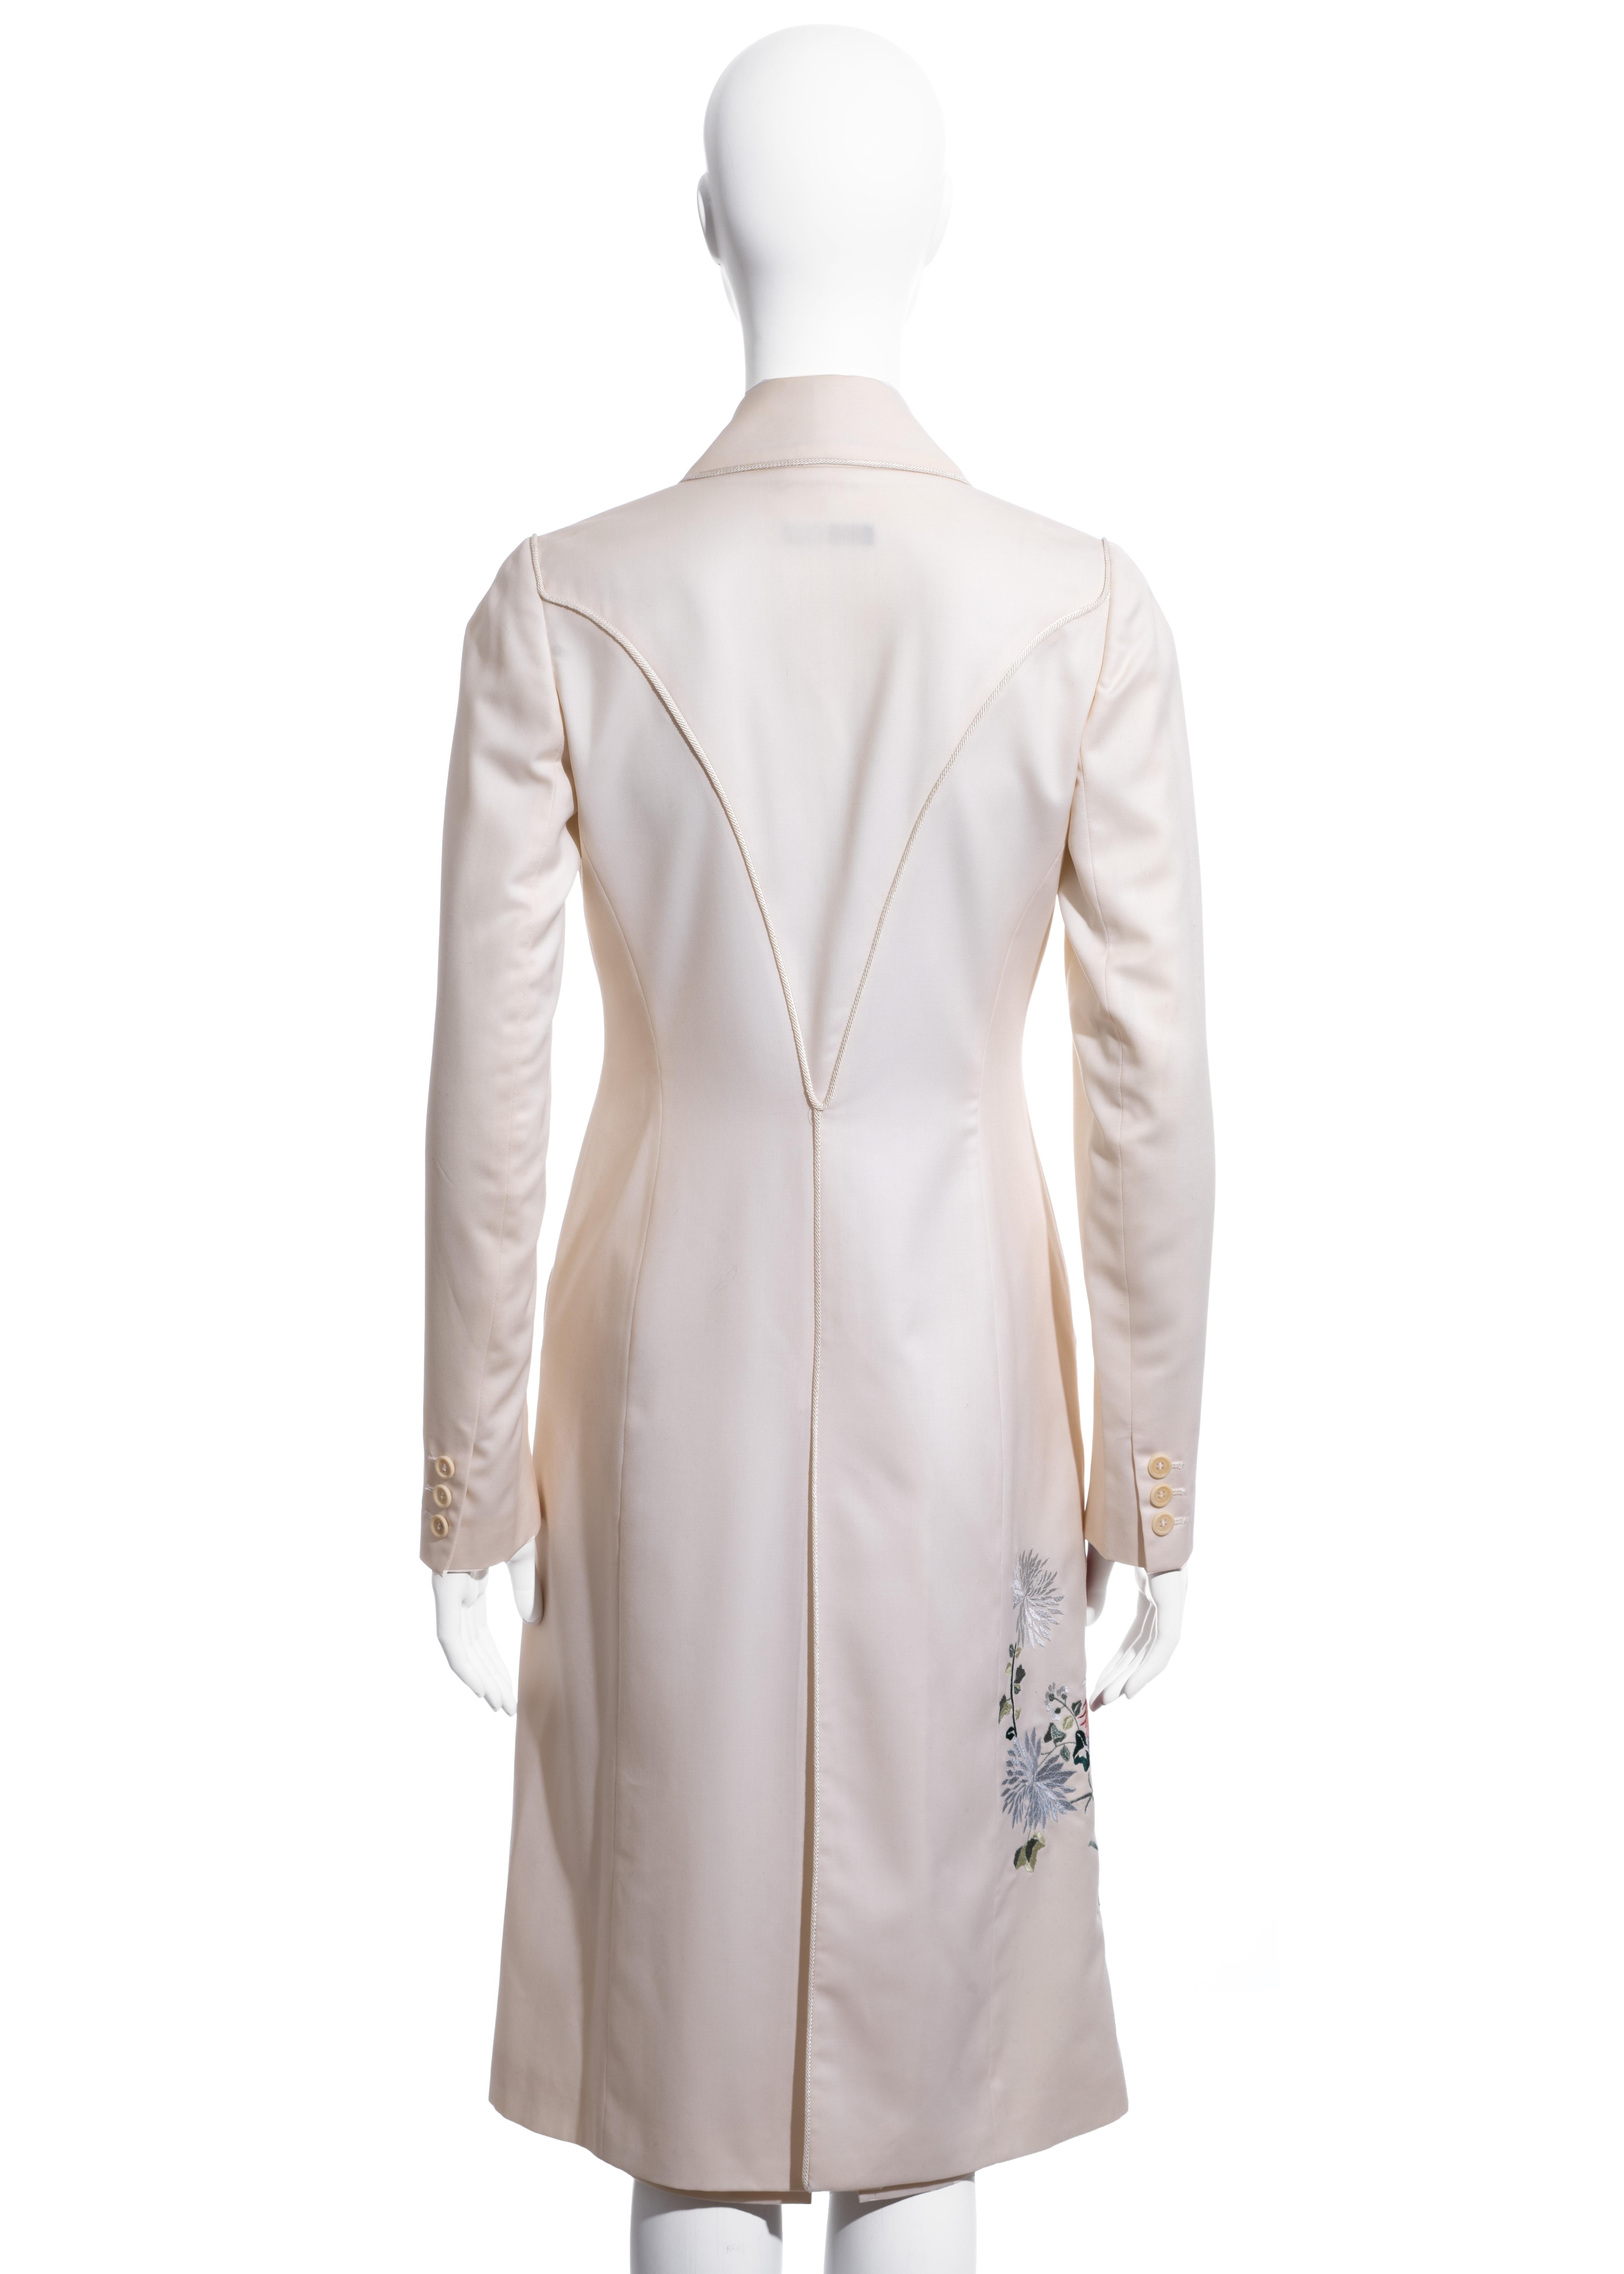 Alexander McQueen ivory wool embroidered skirt suit, c. 1997-1999 In Excellent Condition For Sale In London, GB